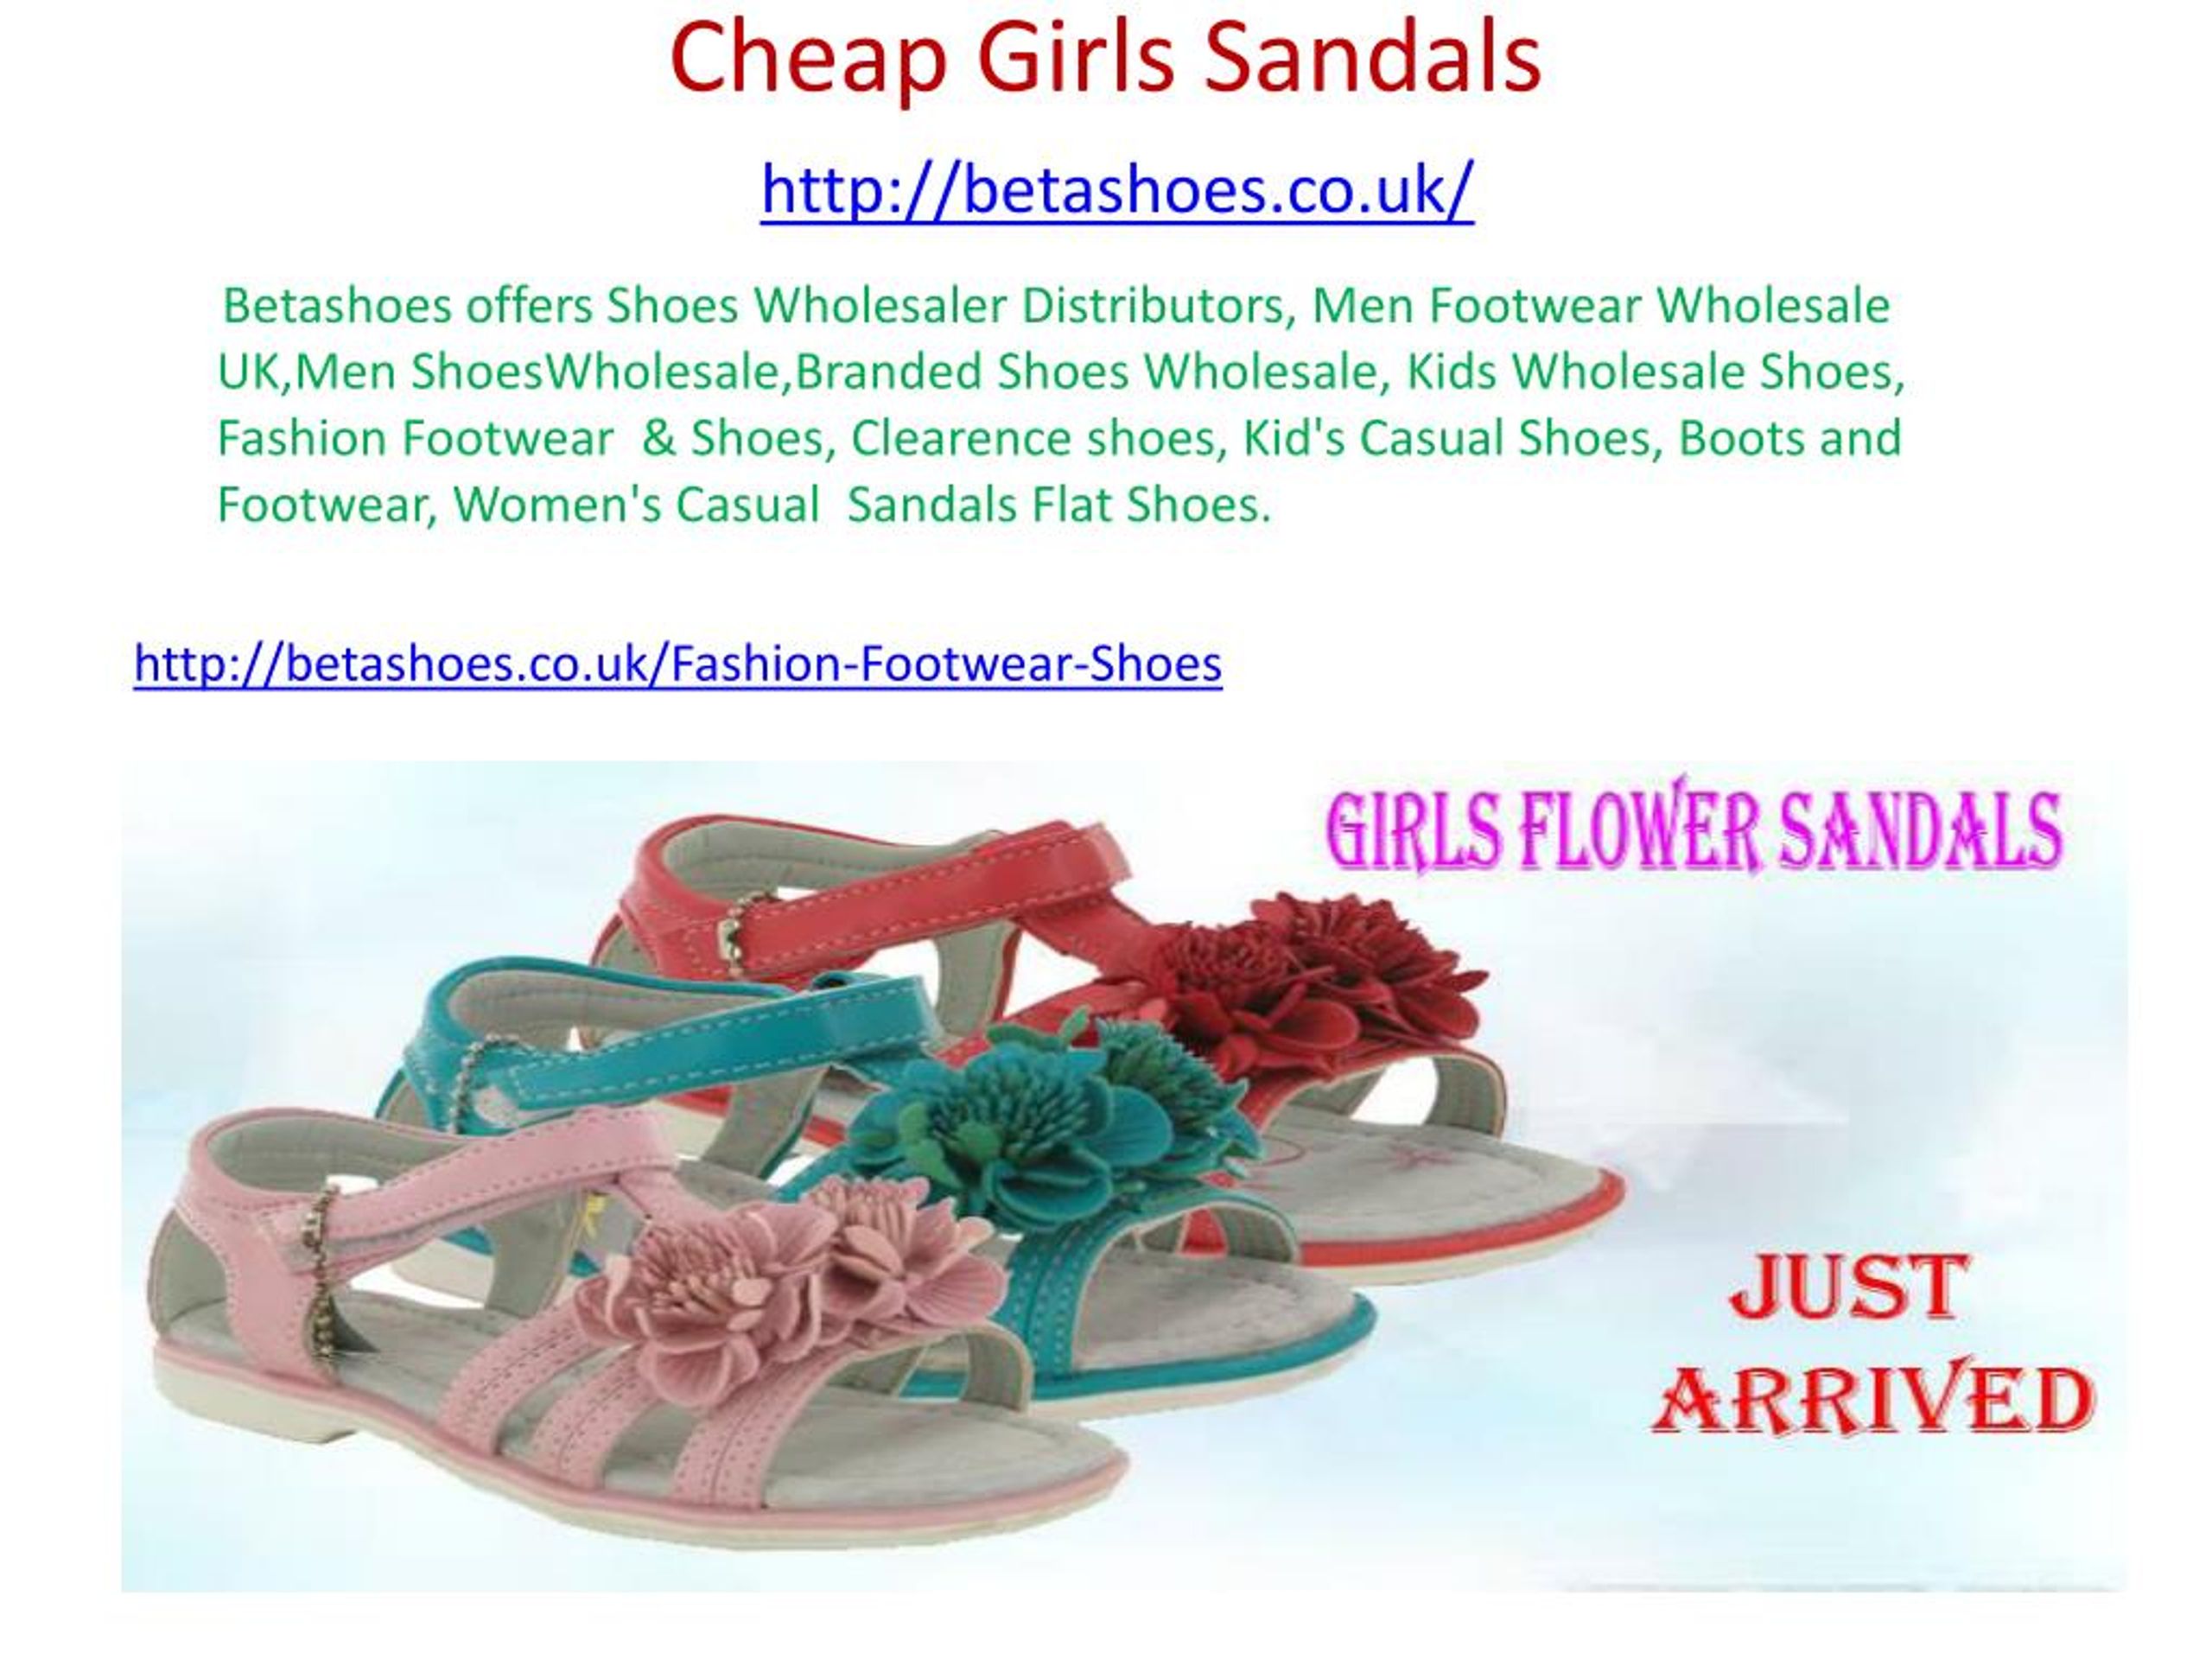 Wholesale Shoe Manufacturers and Supplier | Footwear Wholesaler USA, UK | Wholesale  shoes, Footwear, Shoe manufacturers